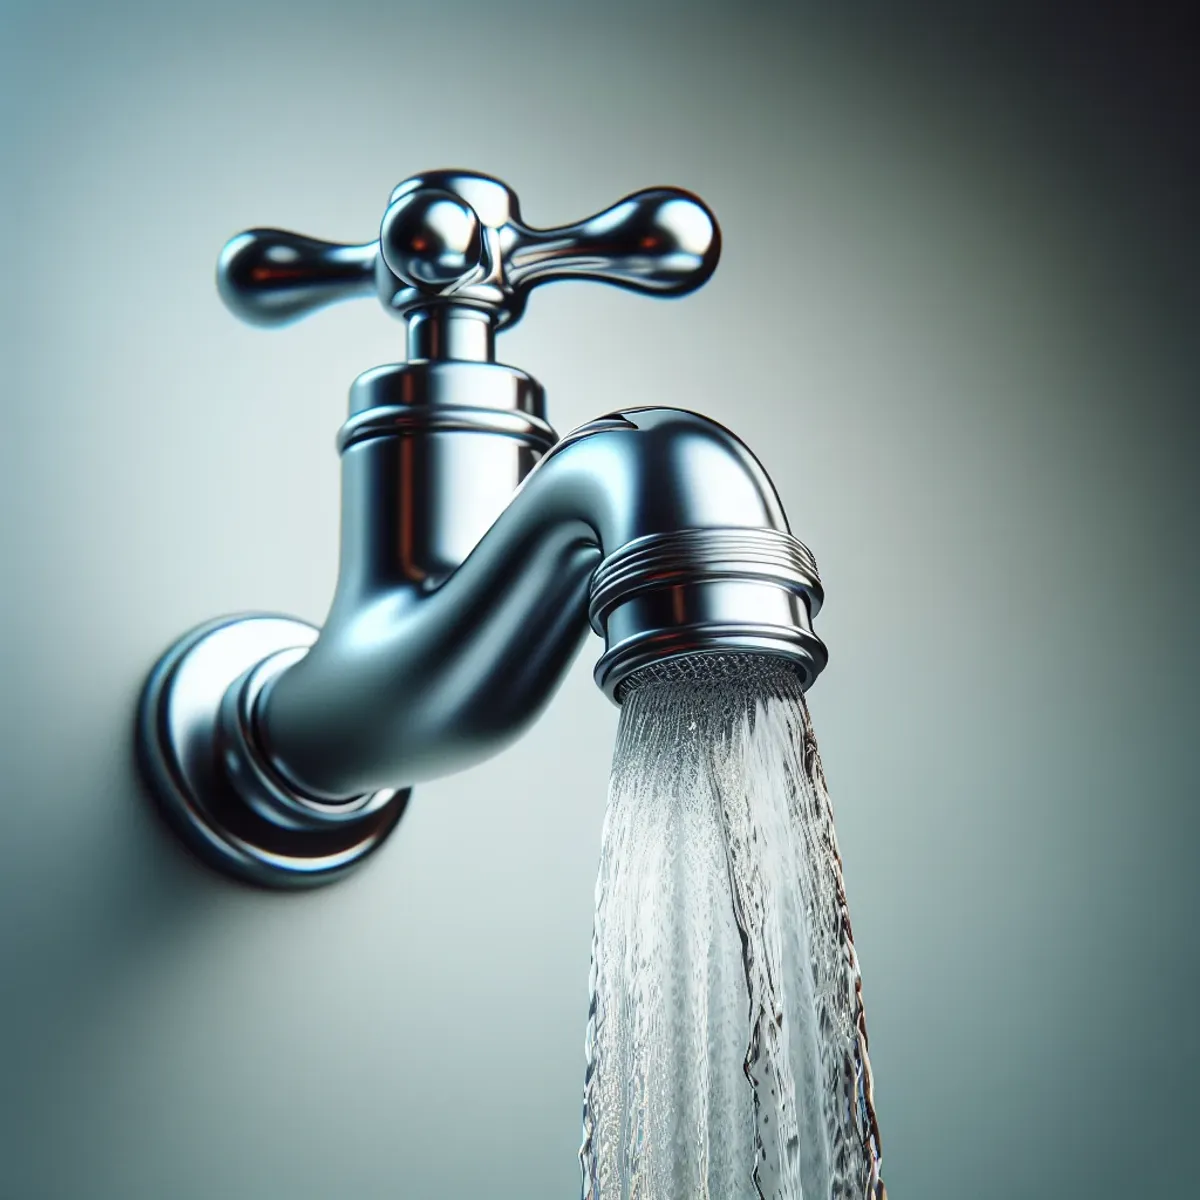 How to Identify and Fix Low Water Pressure Problems2